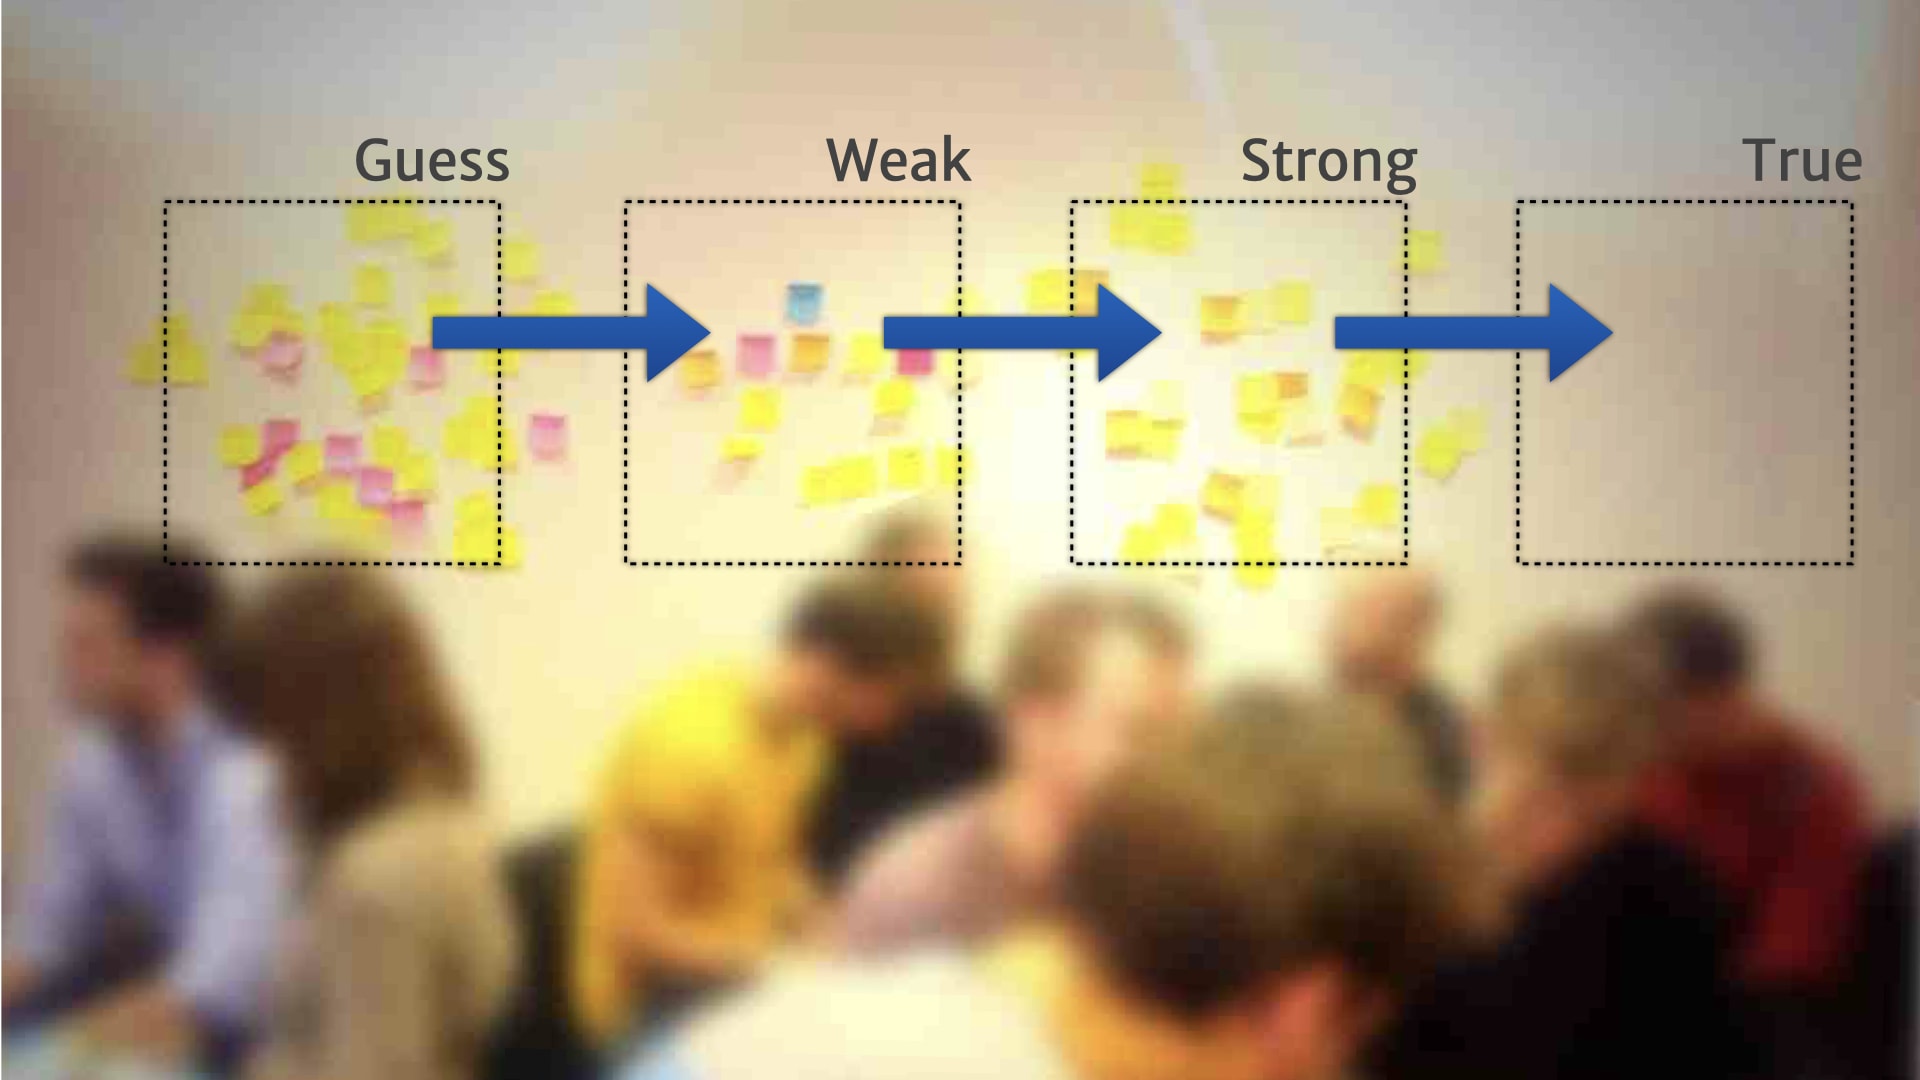 A picture of a wall of post-it notes divided into four categories running left to right (Guess, Weak, Strong, and True). Blue arrows running left-to-right show transitions from Guess to Weak, from Weak to Strong, and from Strong to True.